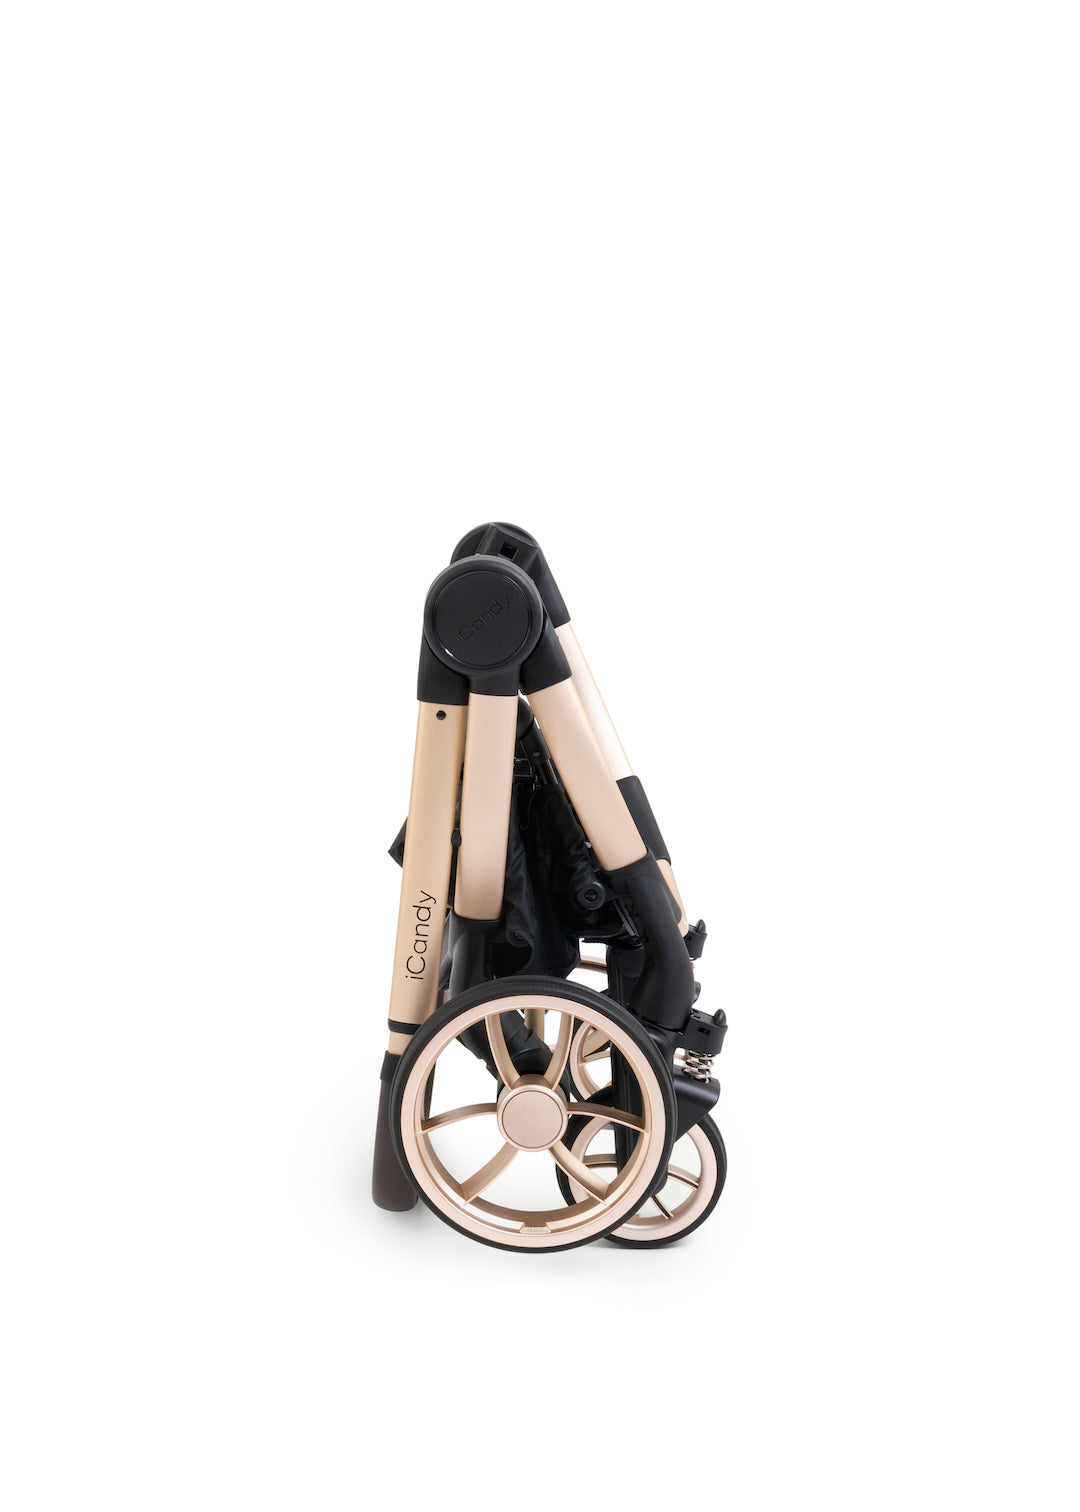 iCandy Peach 7 Pushchair Complete Bundle - Biscotti | Blonde Chassis